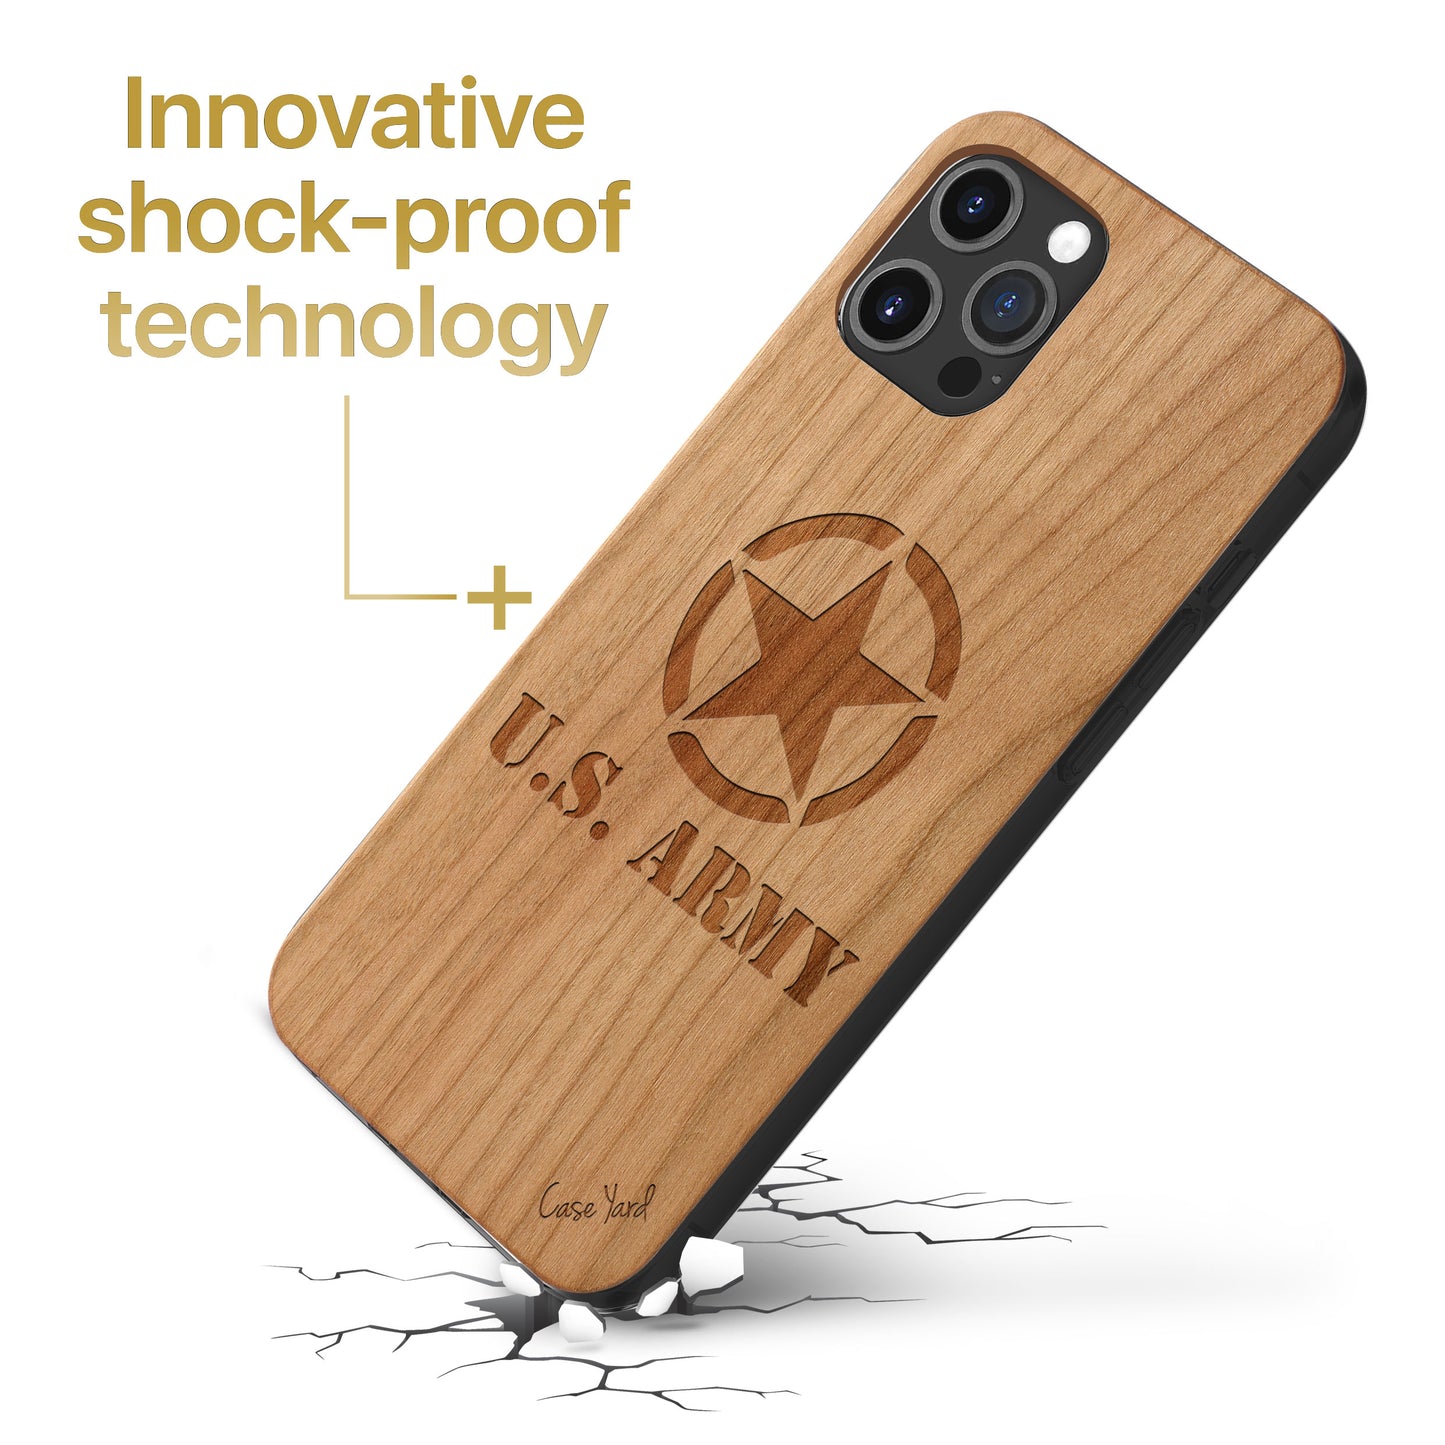 Wooden Cell Phone Case Cover, Laser Engraved case for iPhone & Samsung phone US Army Logo Design